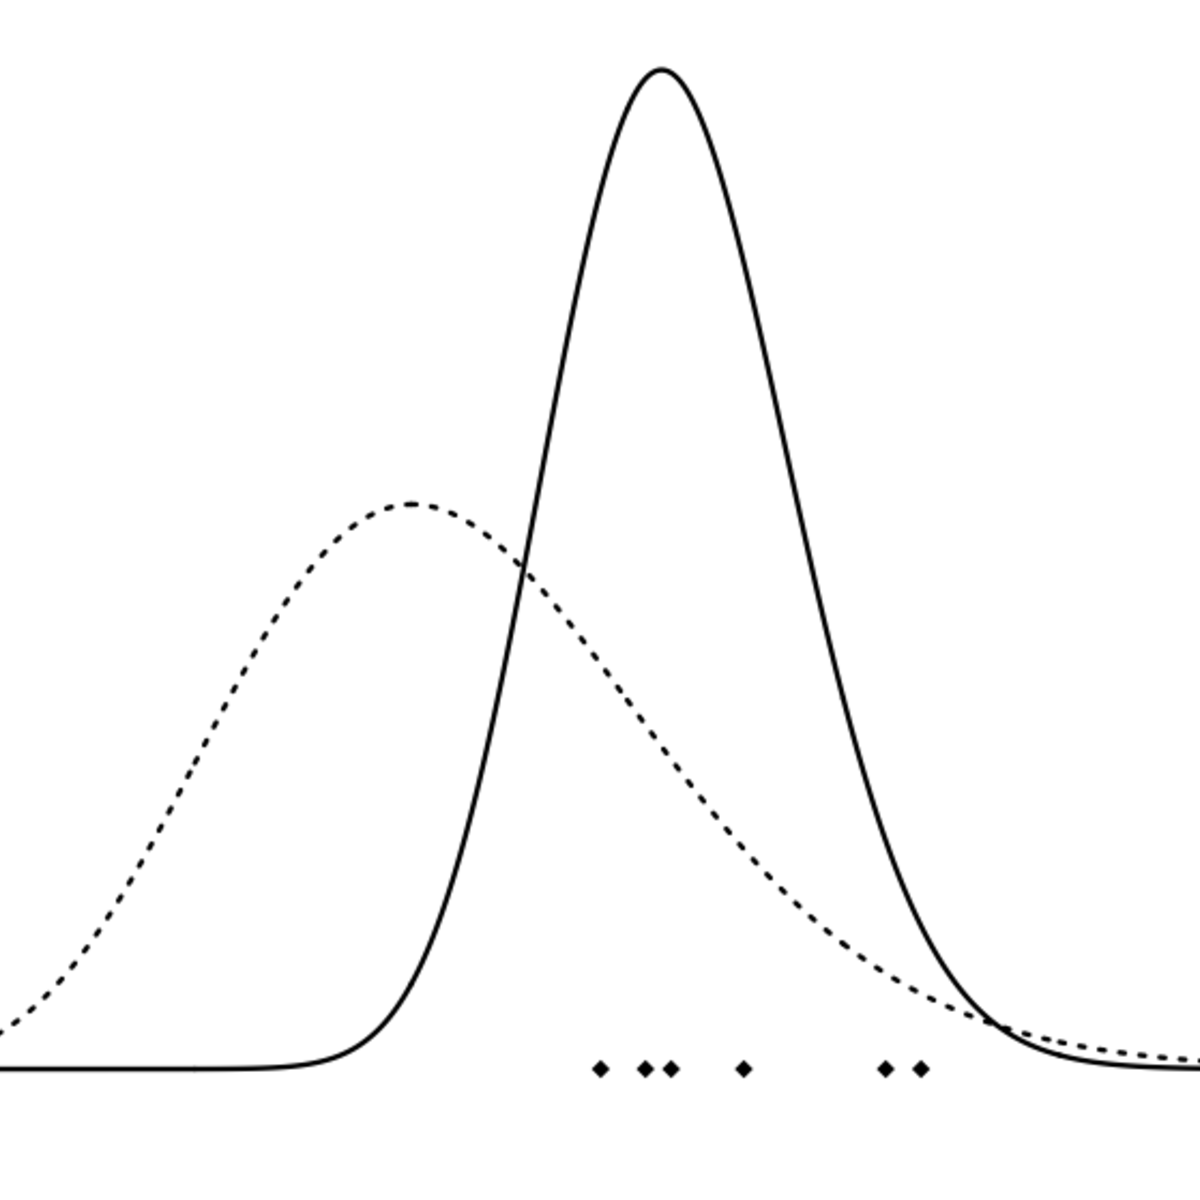 Bayesian Statistics: From Concept to Data Analysis